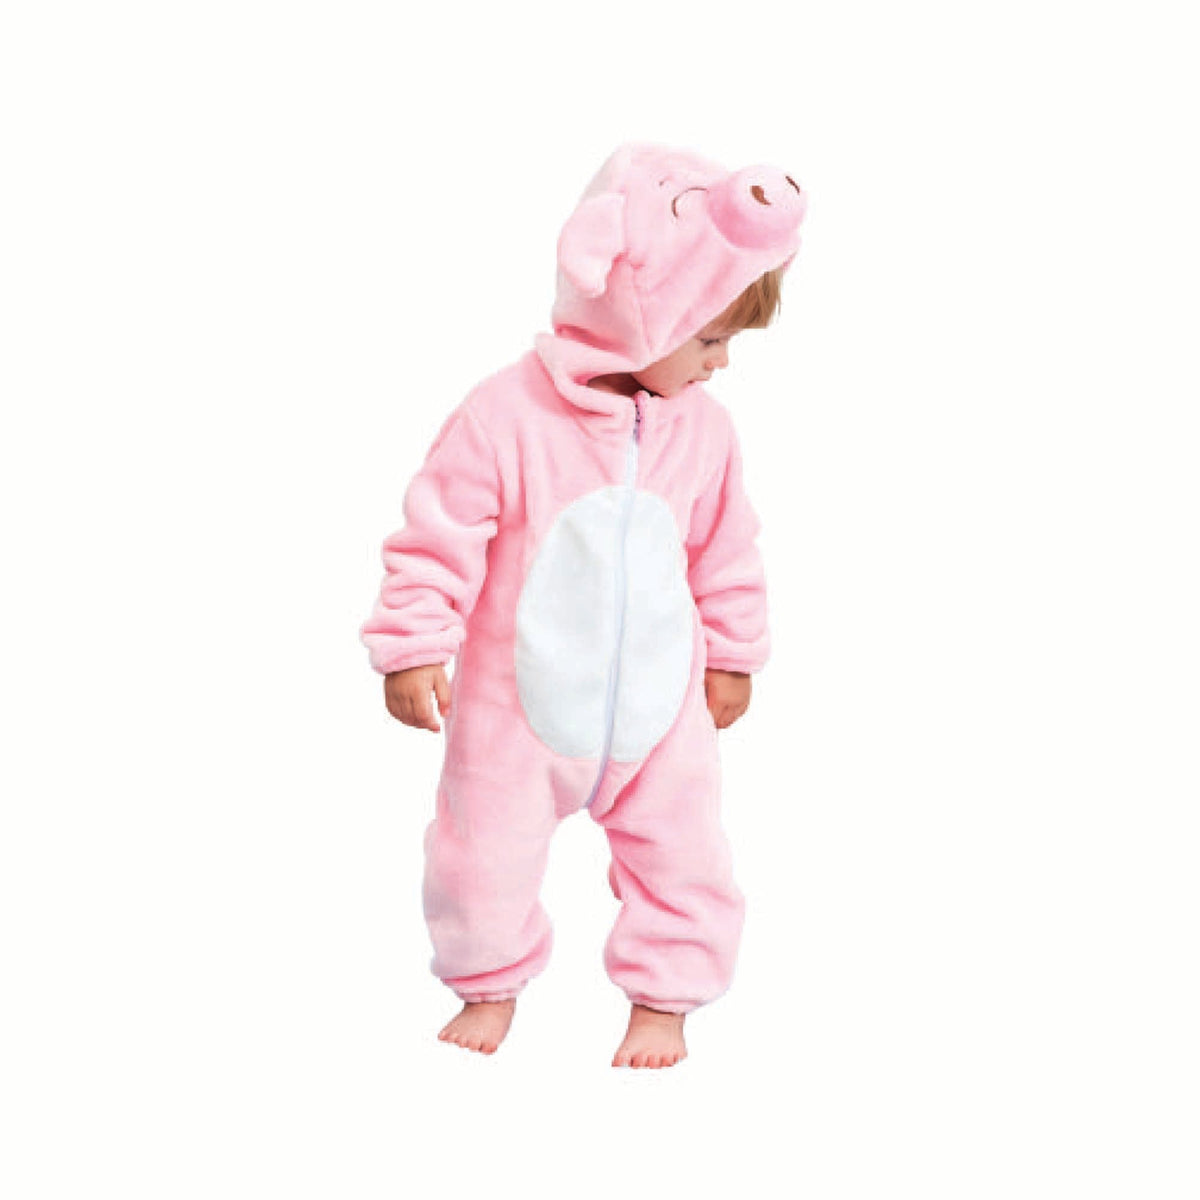 Seeing Red Inc. Costumes Little Pig Costume for Babies, Jumpsuit with Attached Hood